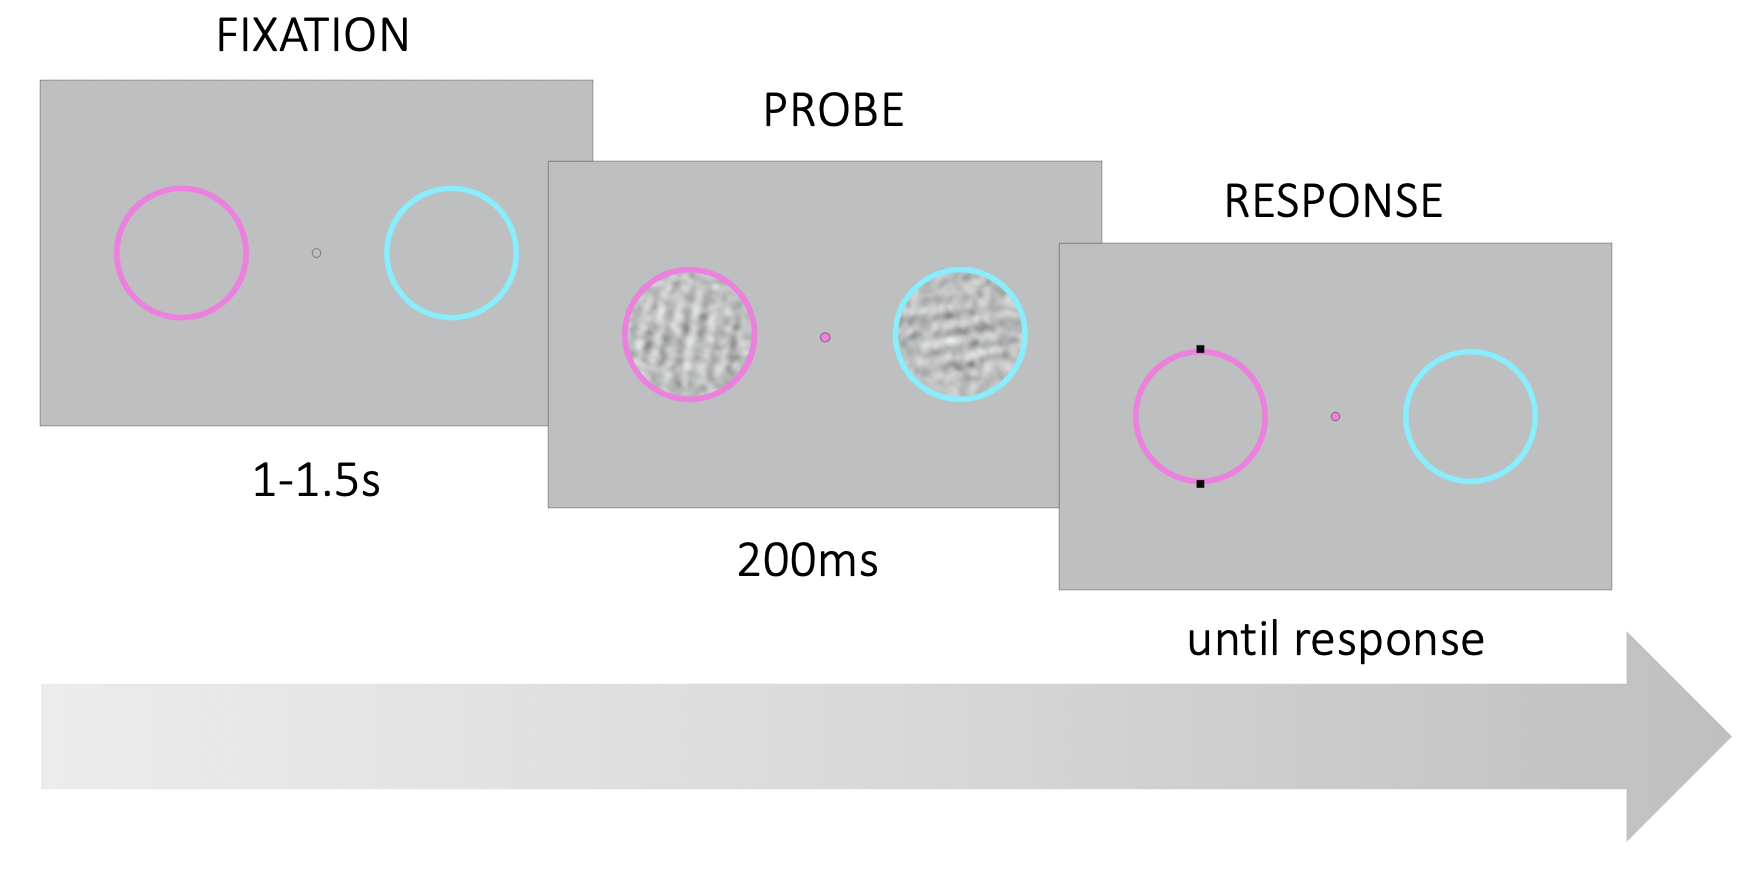 Trial structure followed Experiment 1. However, the two colored rings had different reference orientations. In the example here, the decision boundary for the pink ring was vertical, and horizontal for the cyan ring.